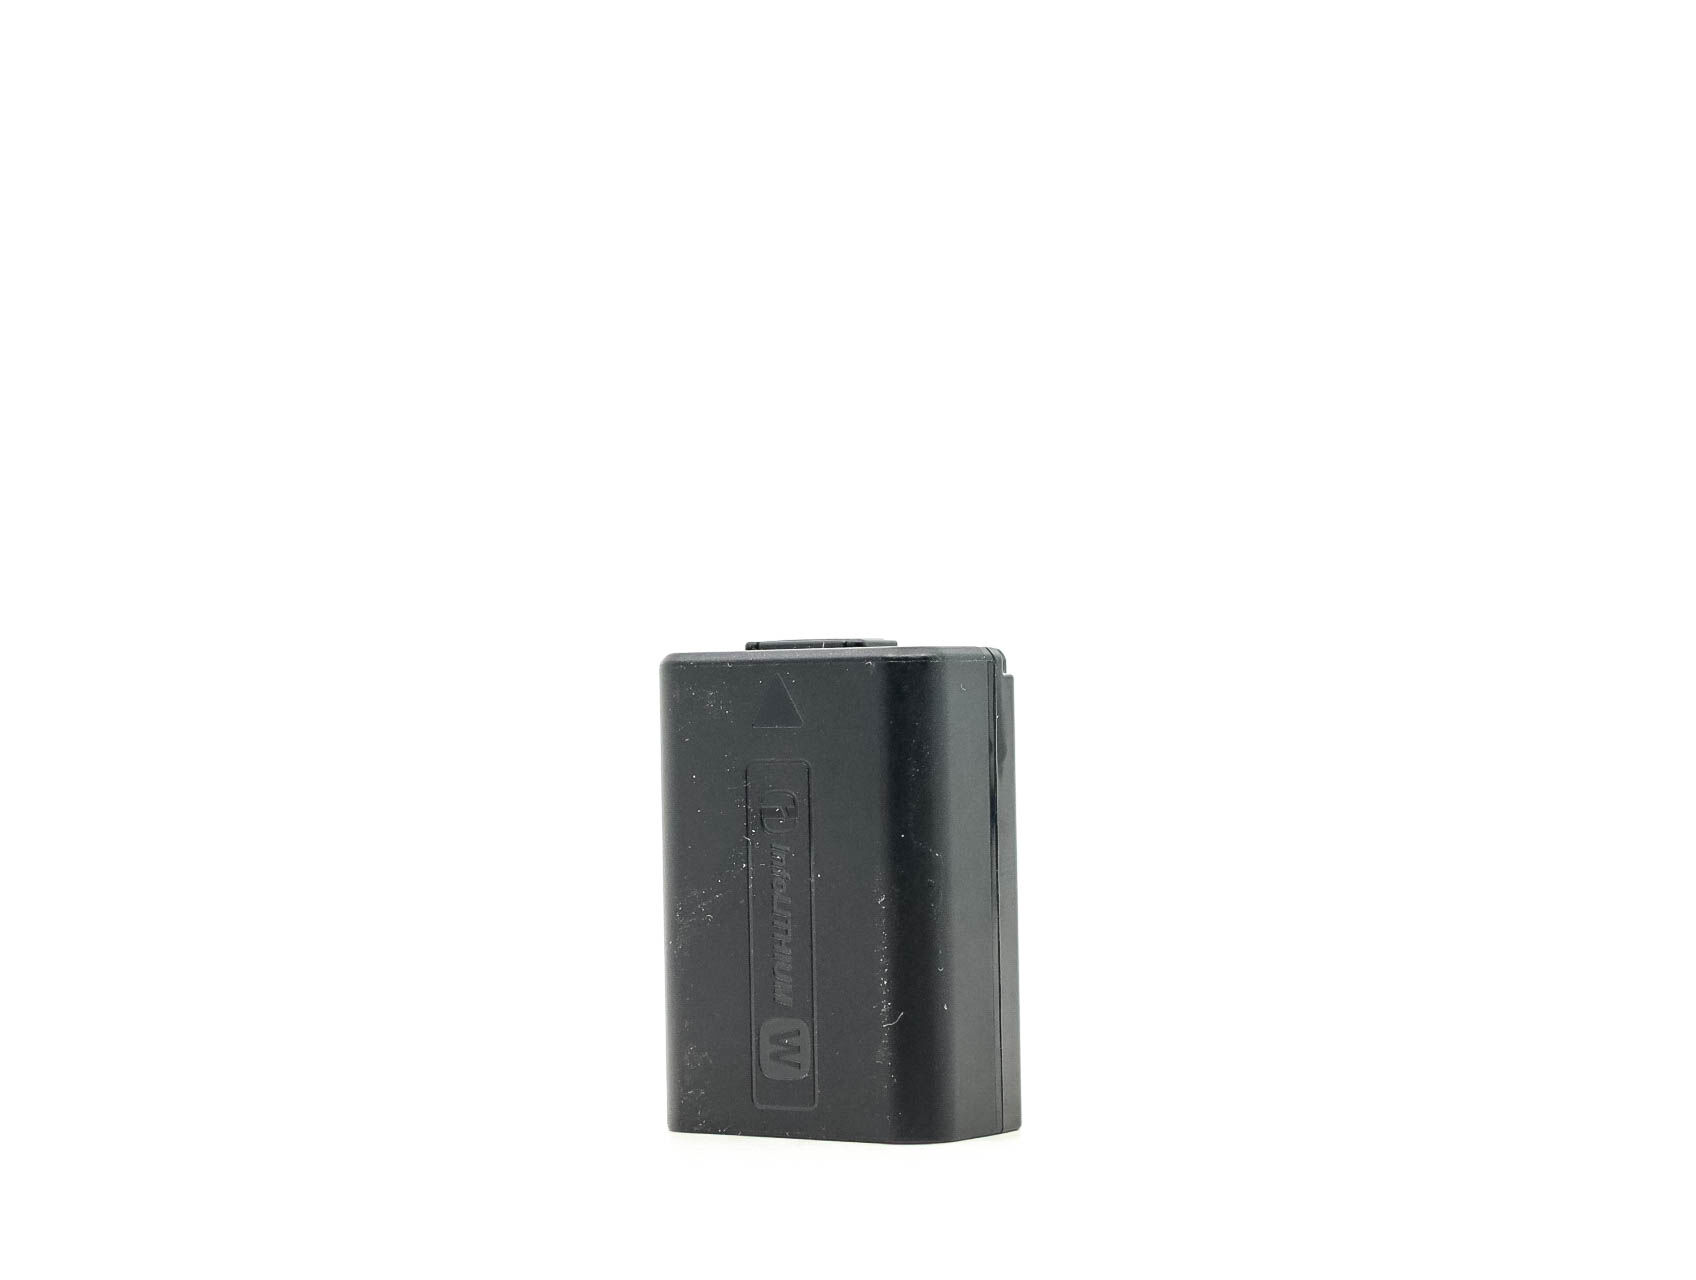 Sony NP-FW50 Battery (Condition: Good)